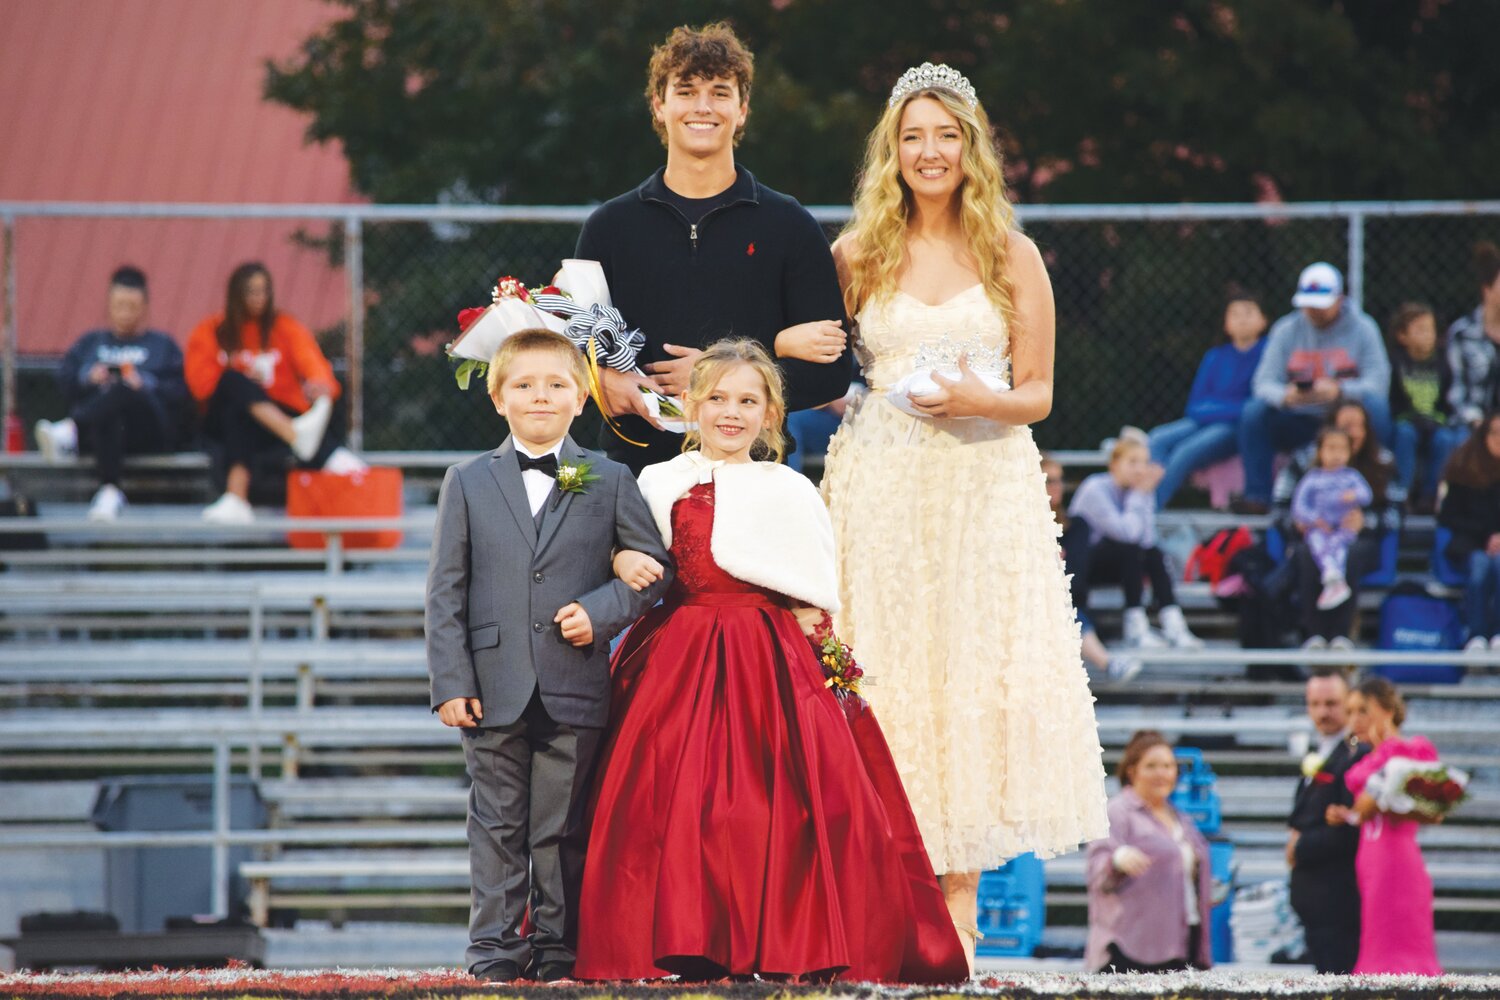 2022 Homecoming Queen, Savannah Villines, was escorted by Amos Mayes. They were joined by junior attendants Clayton Comer and Mallorie Thomas.